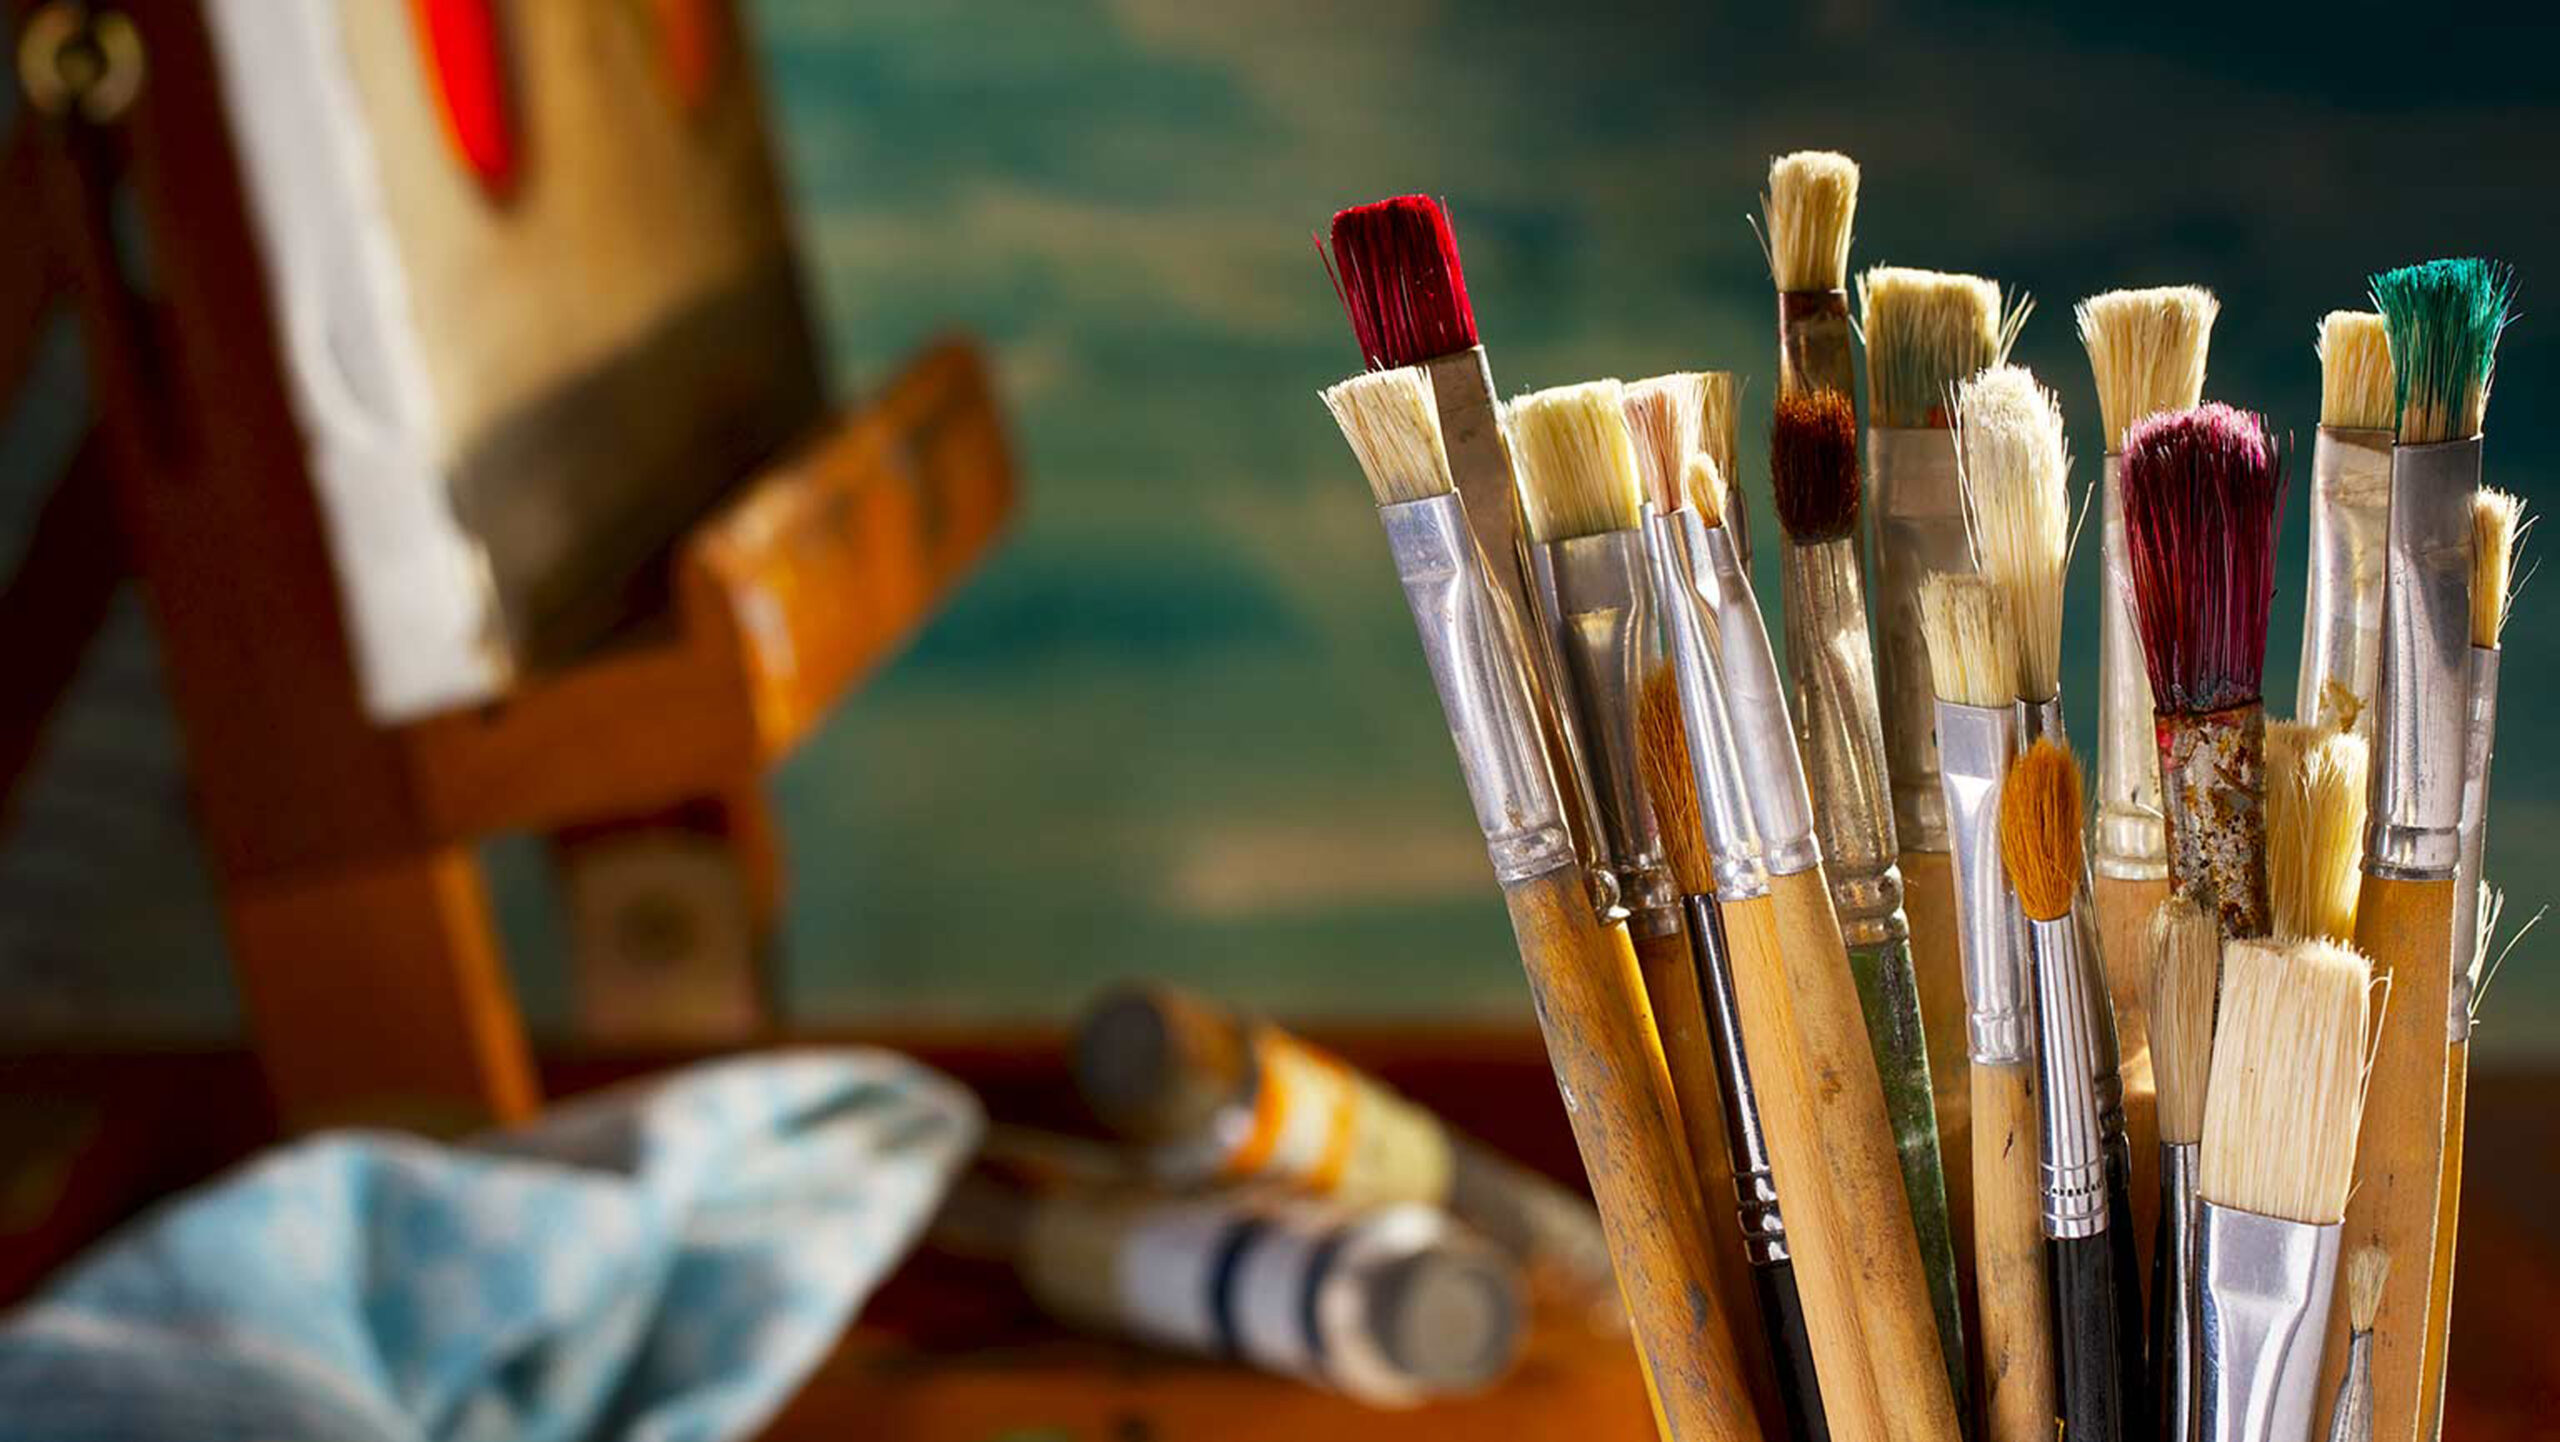 The Painter’s Toolkit